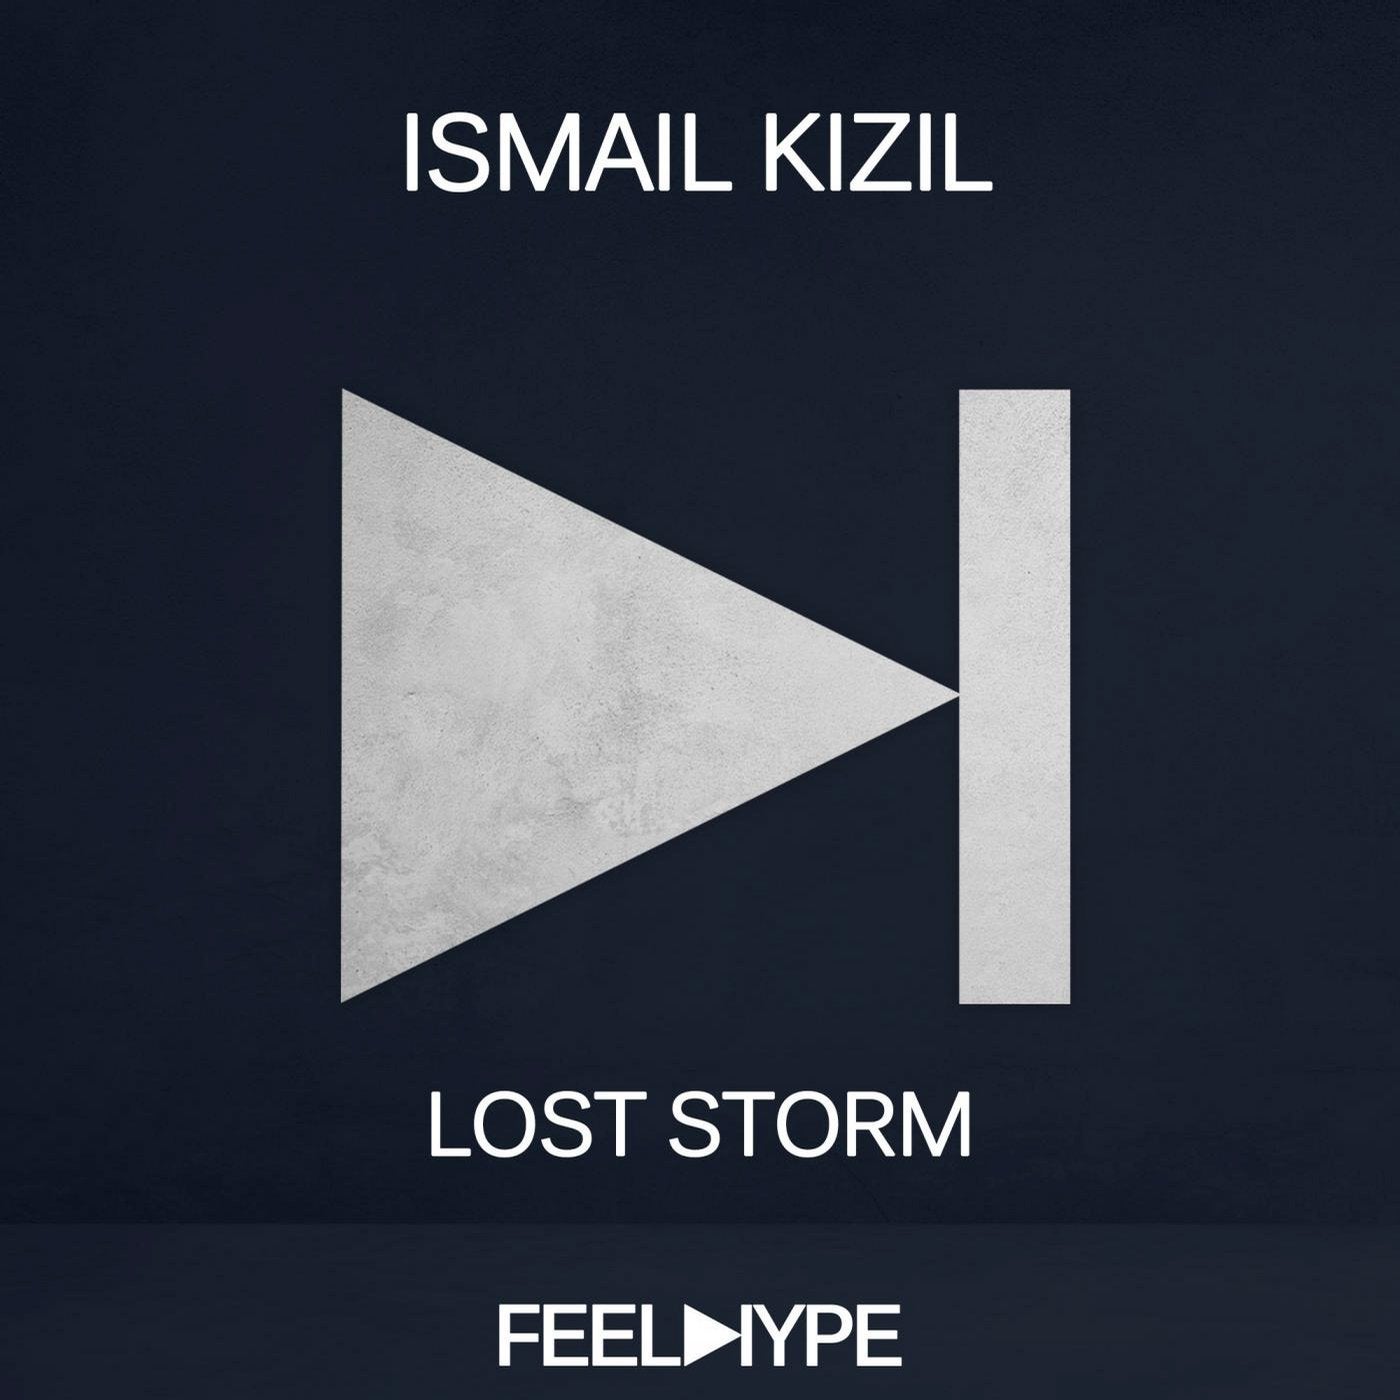 Lost Storm